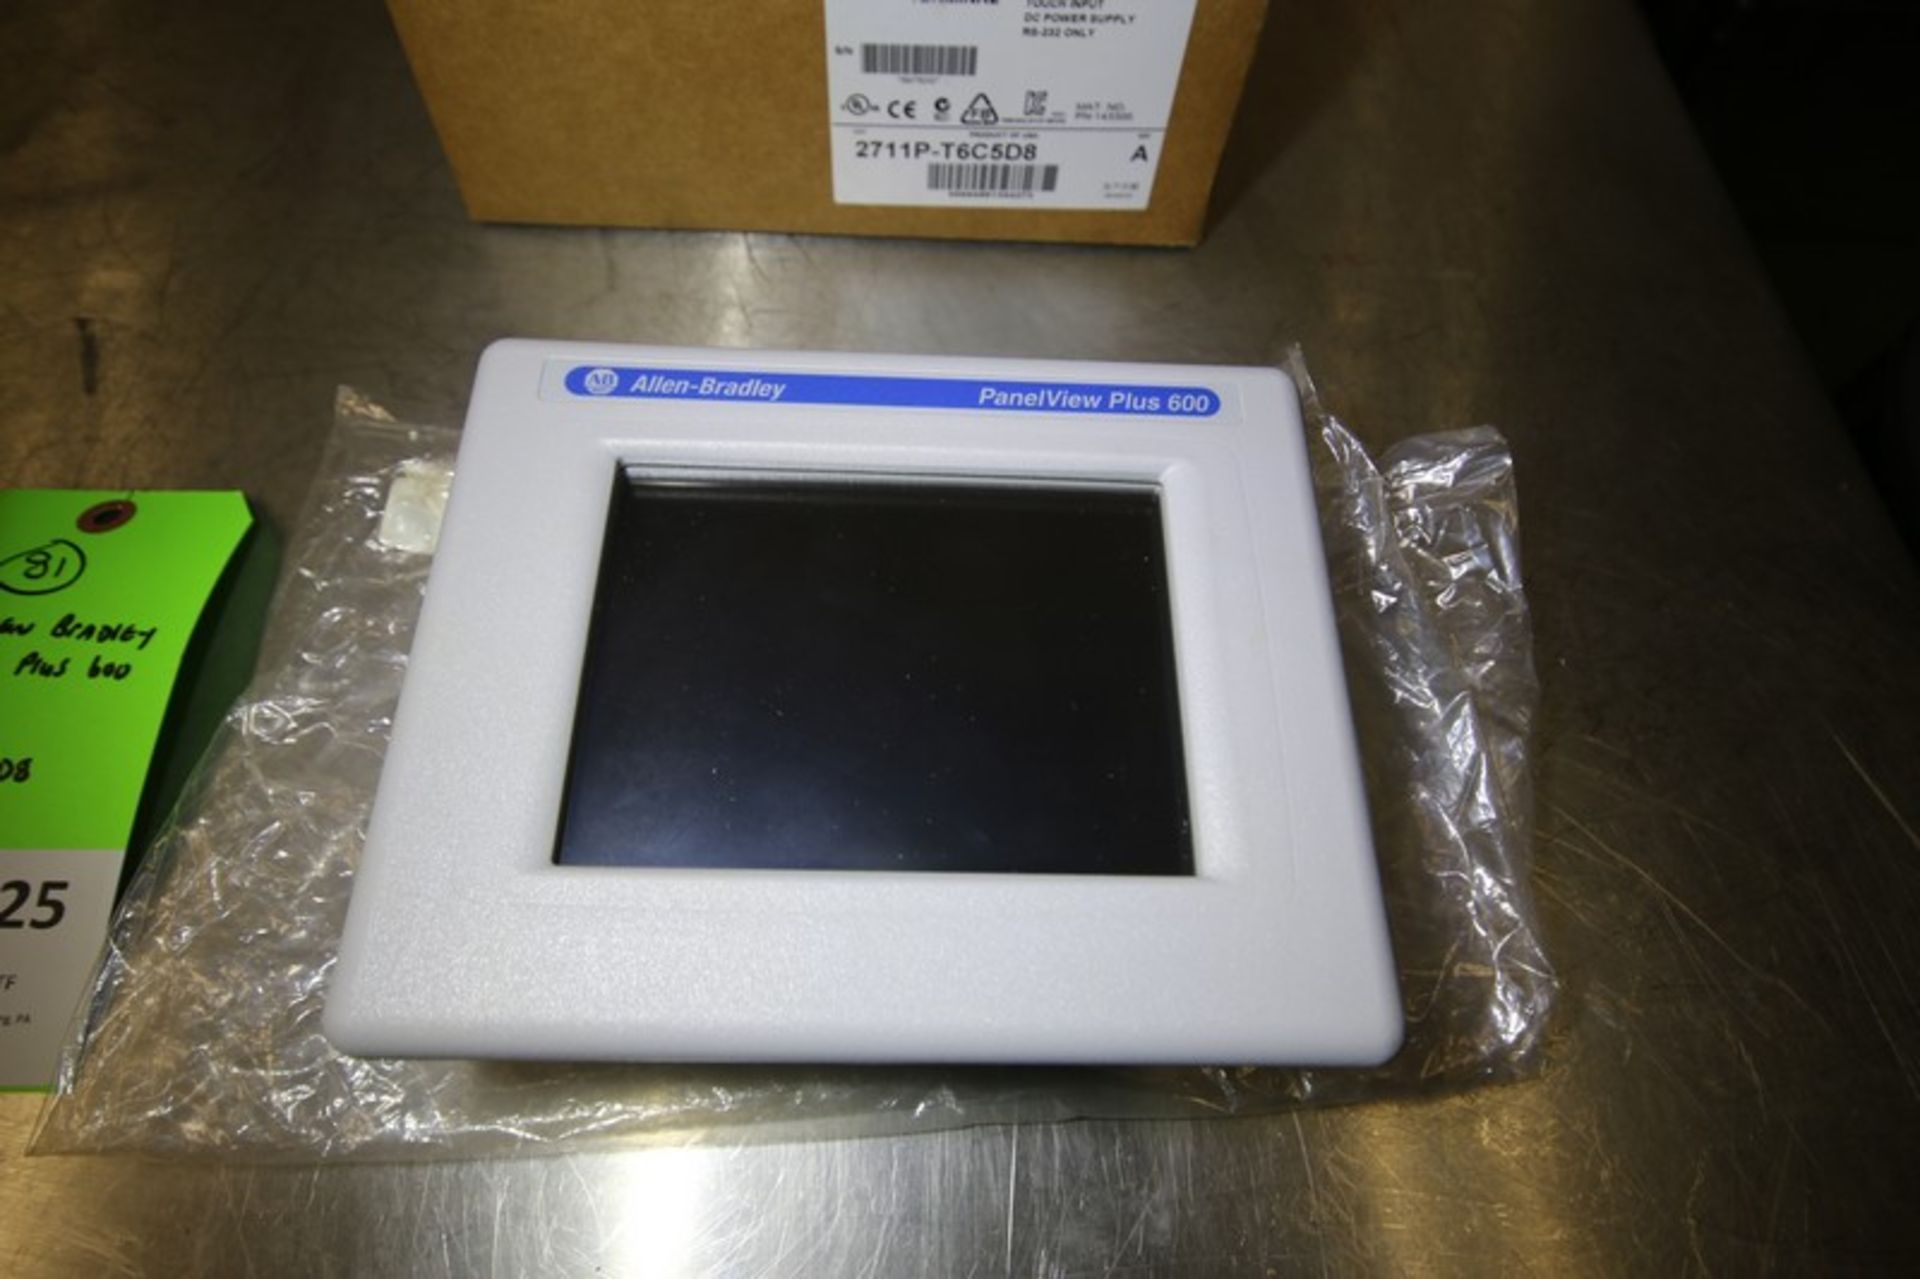 New Allen Bradley 6" Panelview Plus 600, Cat. No. 2711P-T6C5D8 Series A (INV#88425)(Located @ the - Image 2 of 3